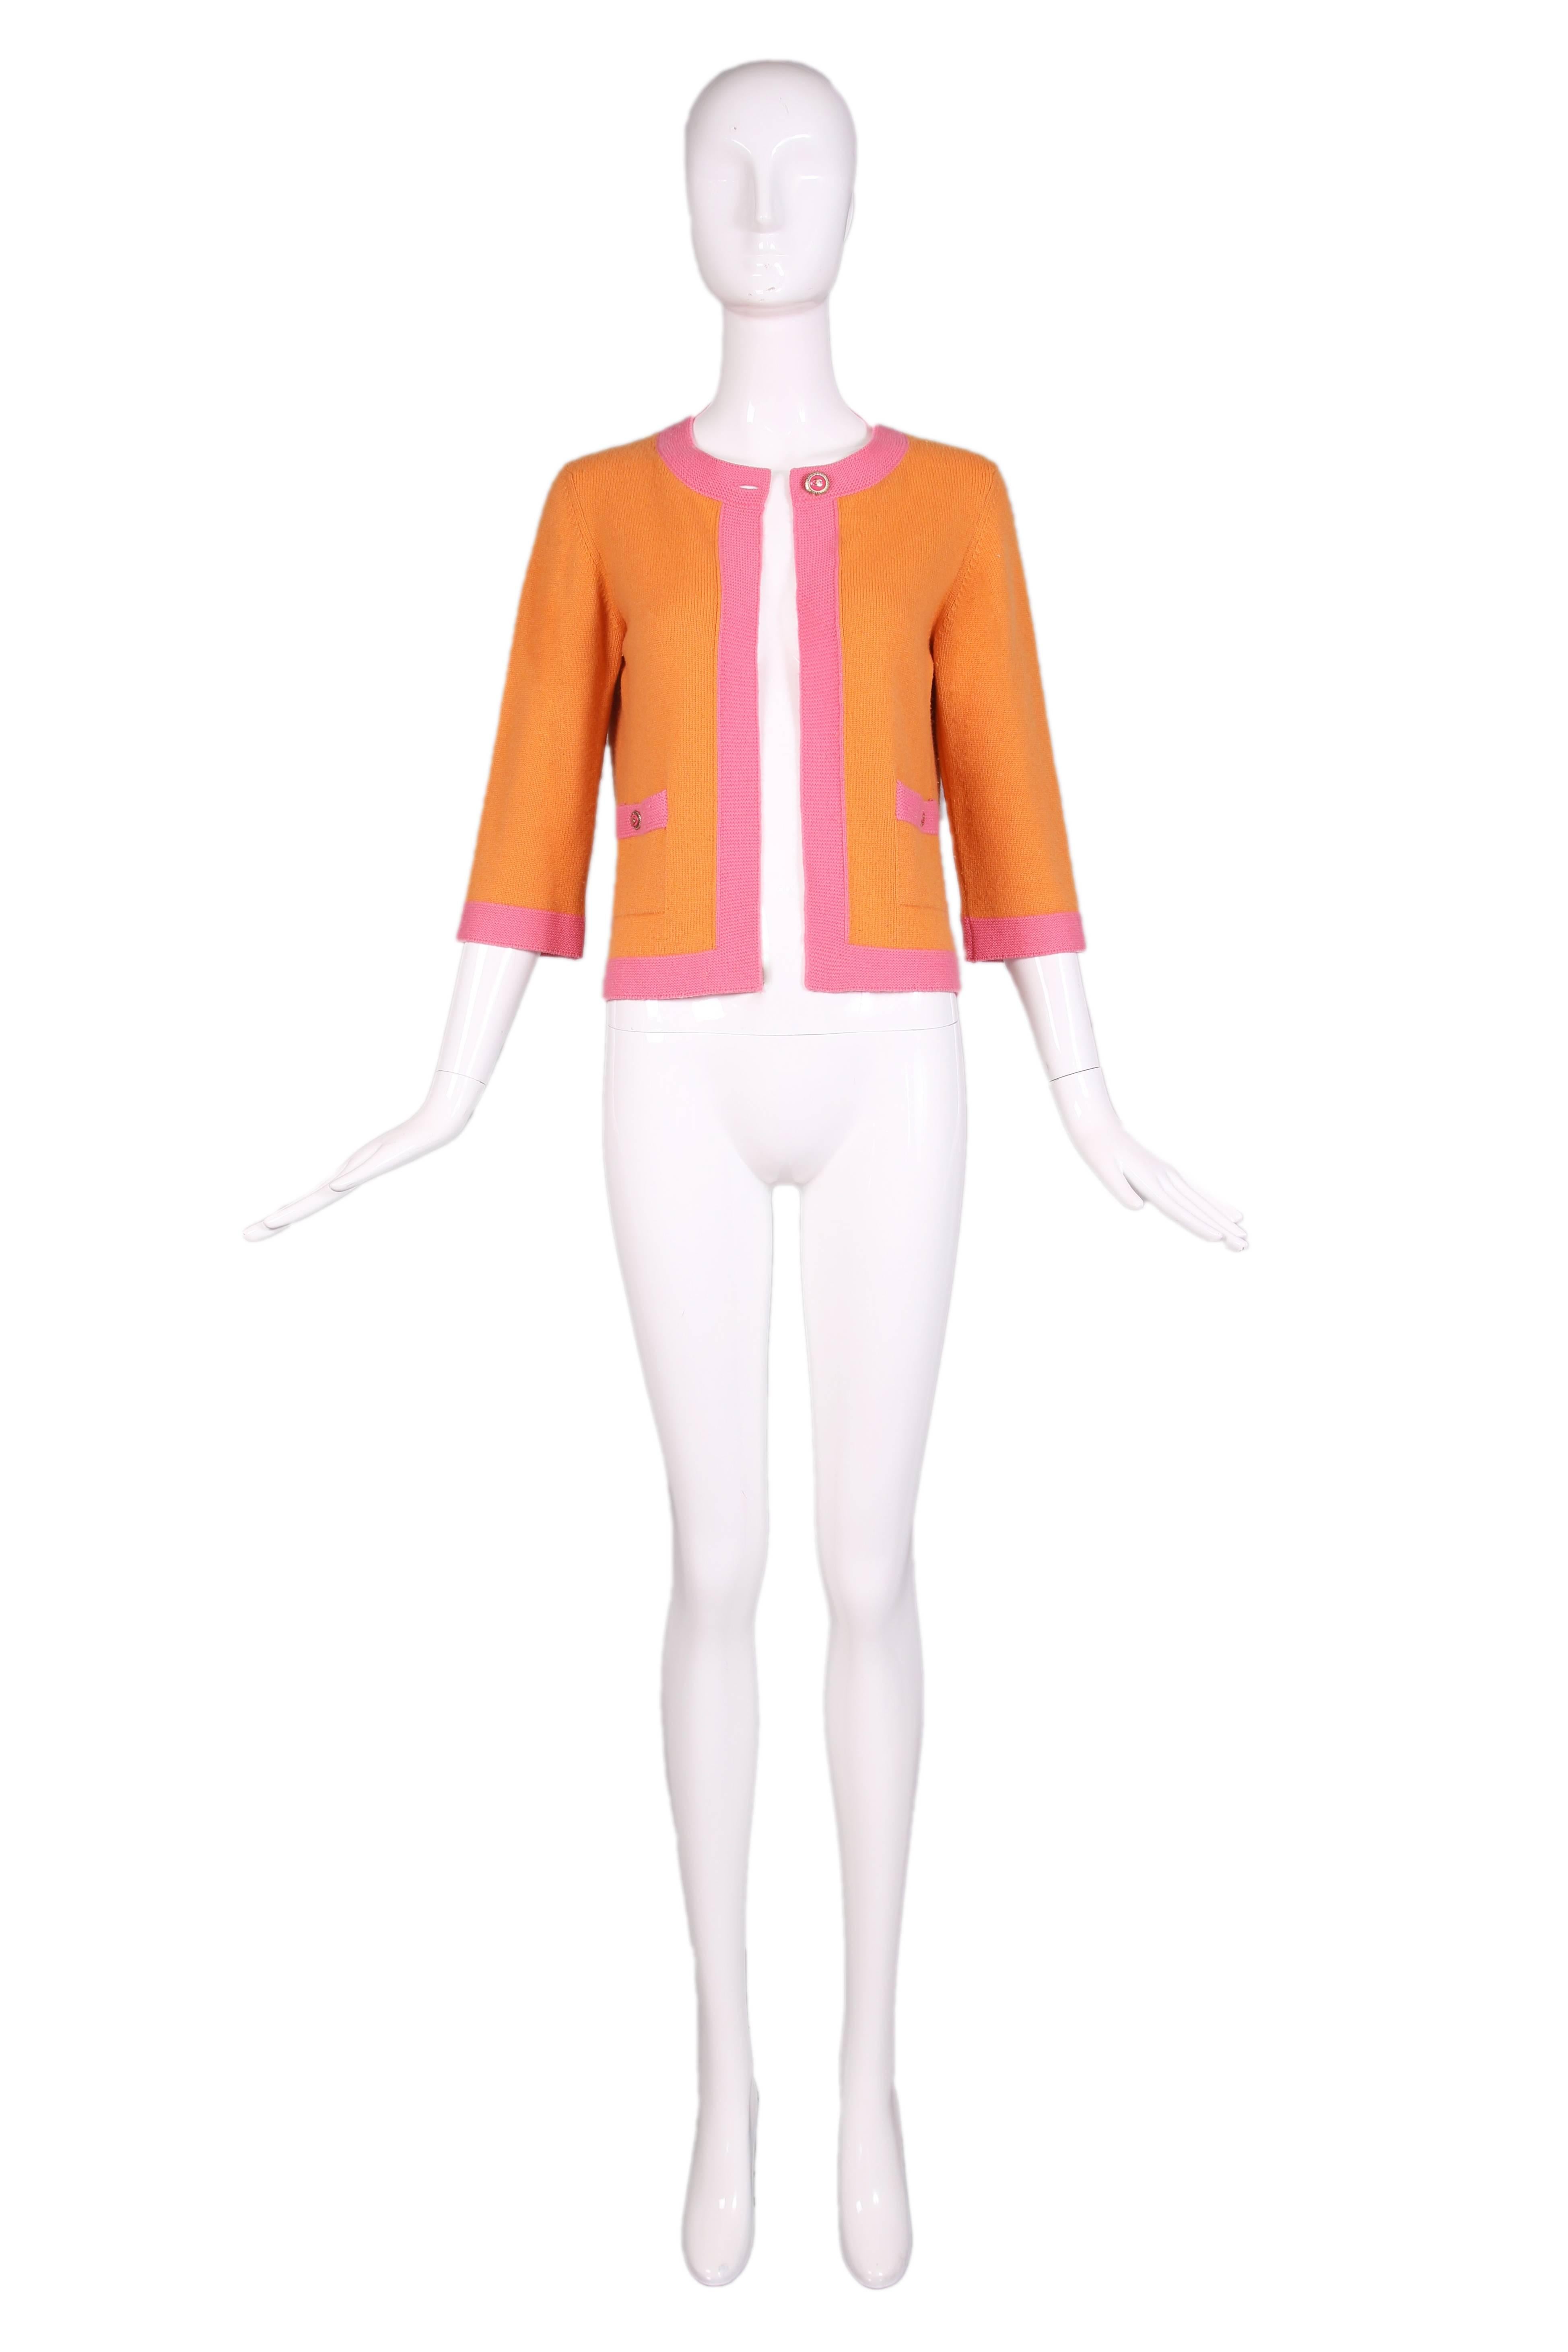 2007 P/E Chanel orange cashmere open front cardigan with pink trim. Features round pink & gold toned Chanel CC Logo buttons at top closure and at two front pockets. In excellent condition. Size EU 38.
MEASUREMENTS: (approx. measurements with panels